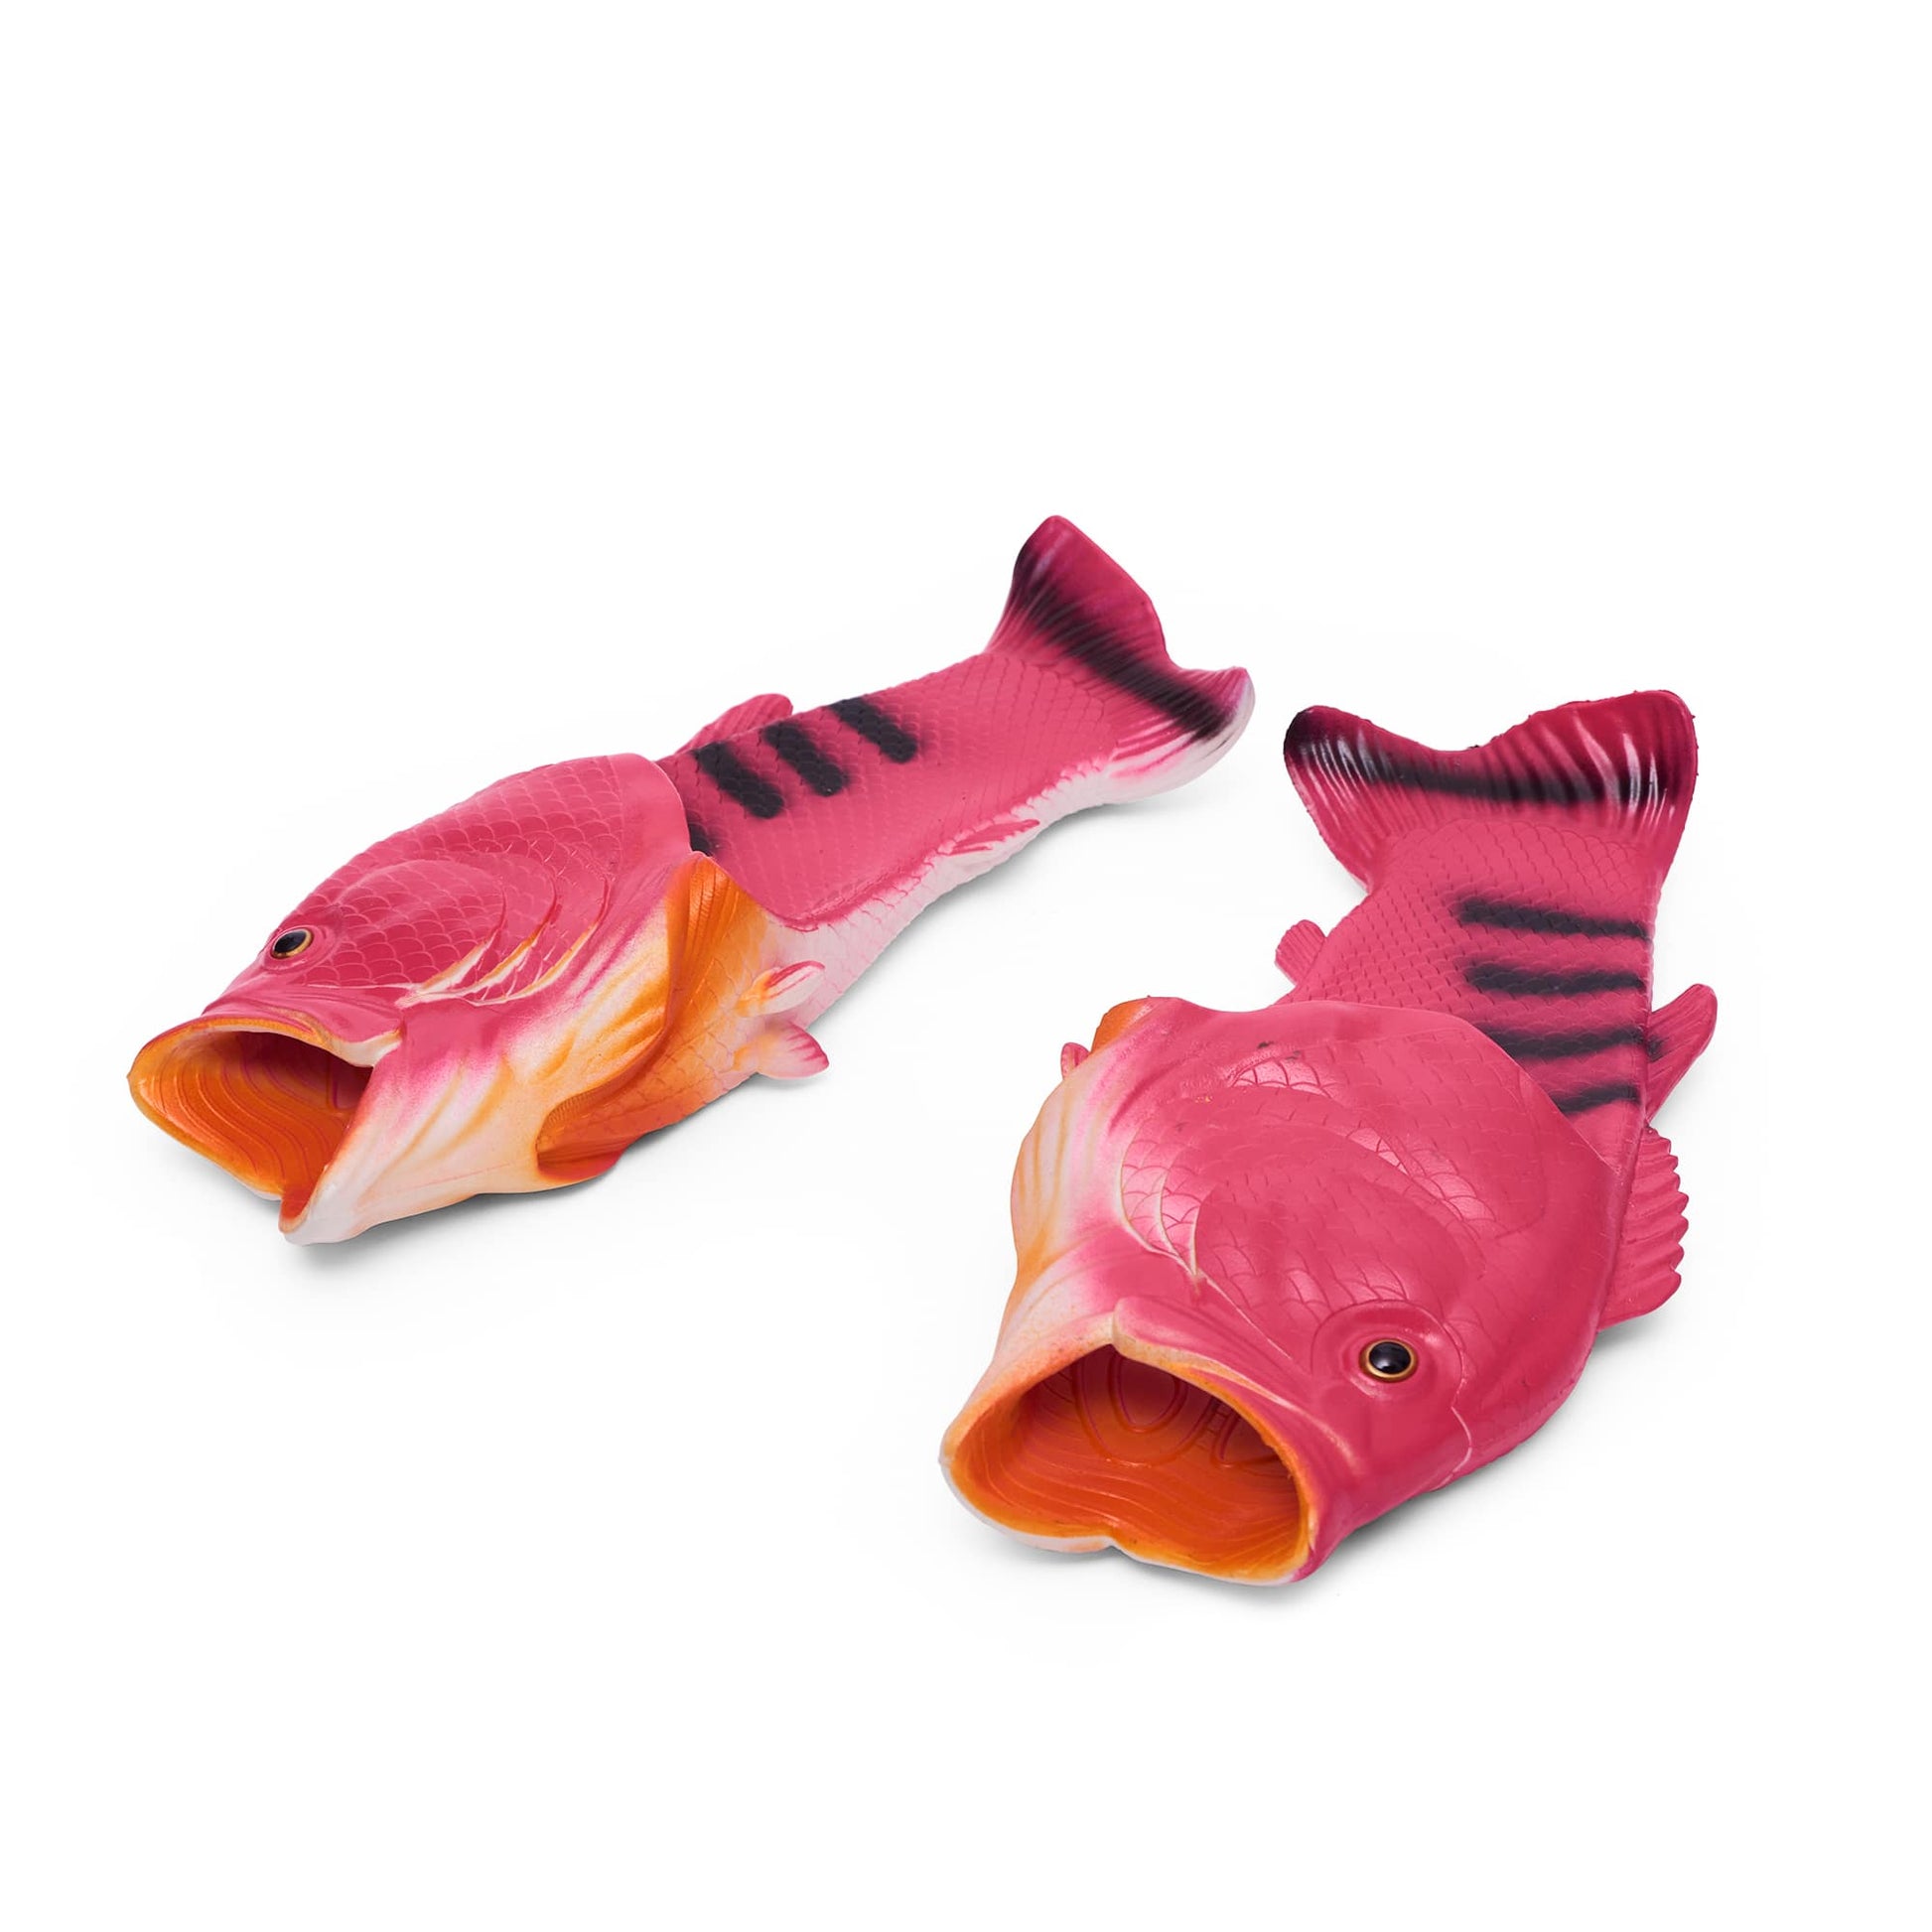 pink, orange, white and black fish slippers --- slide slippers in the shape and texture of a fish, mouth of fish is the opening for the toes